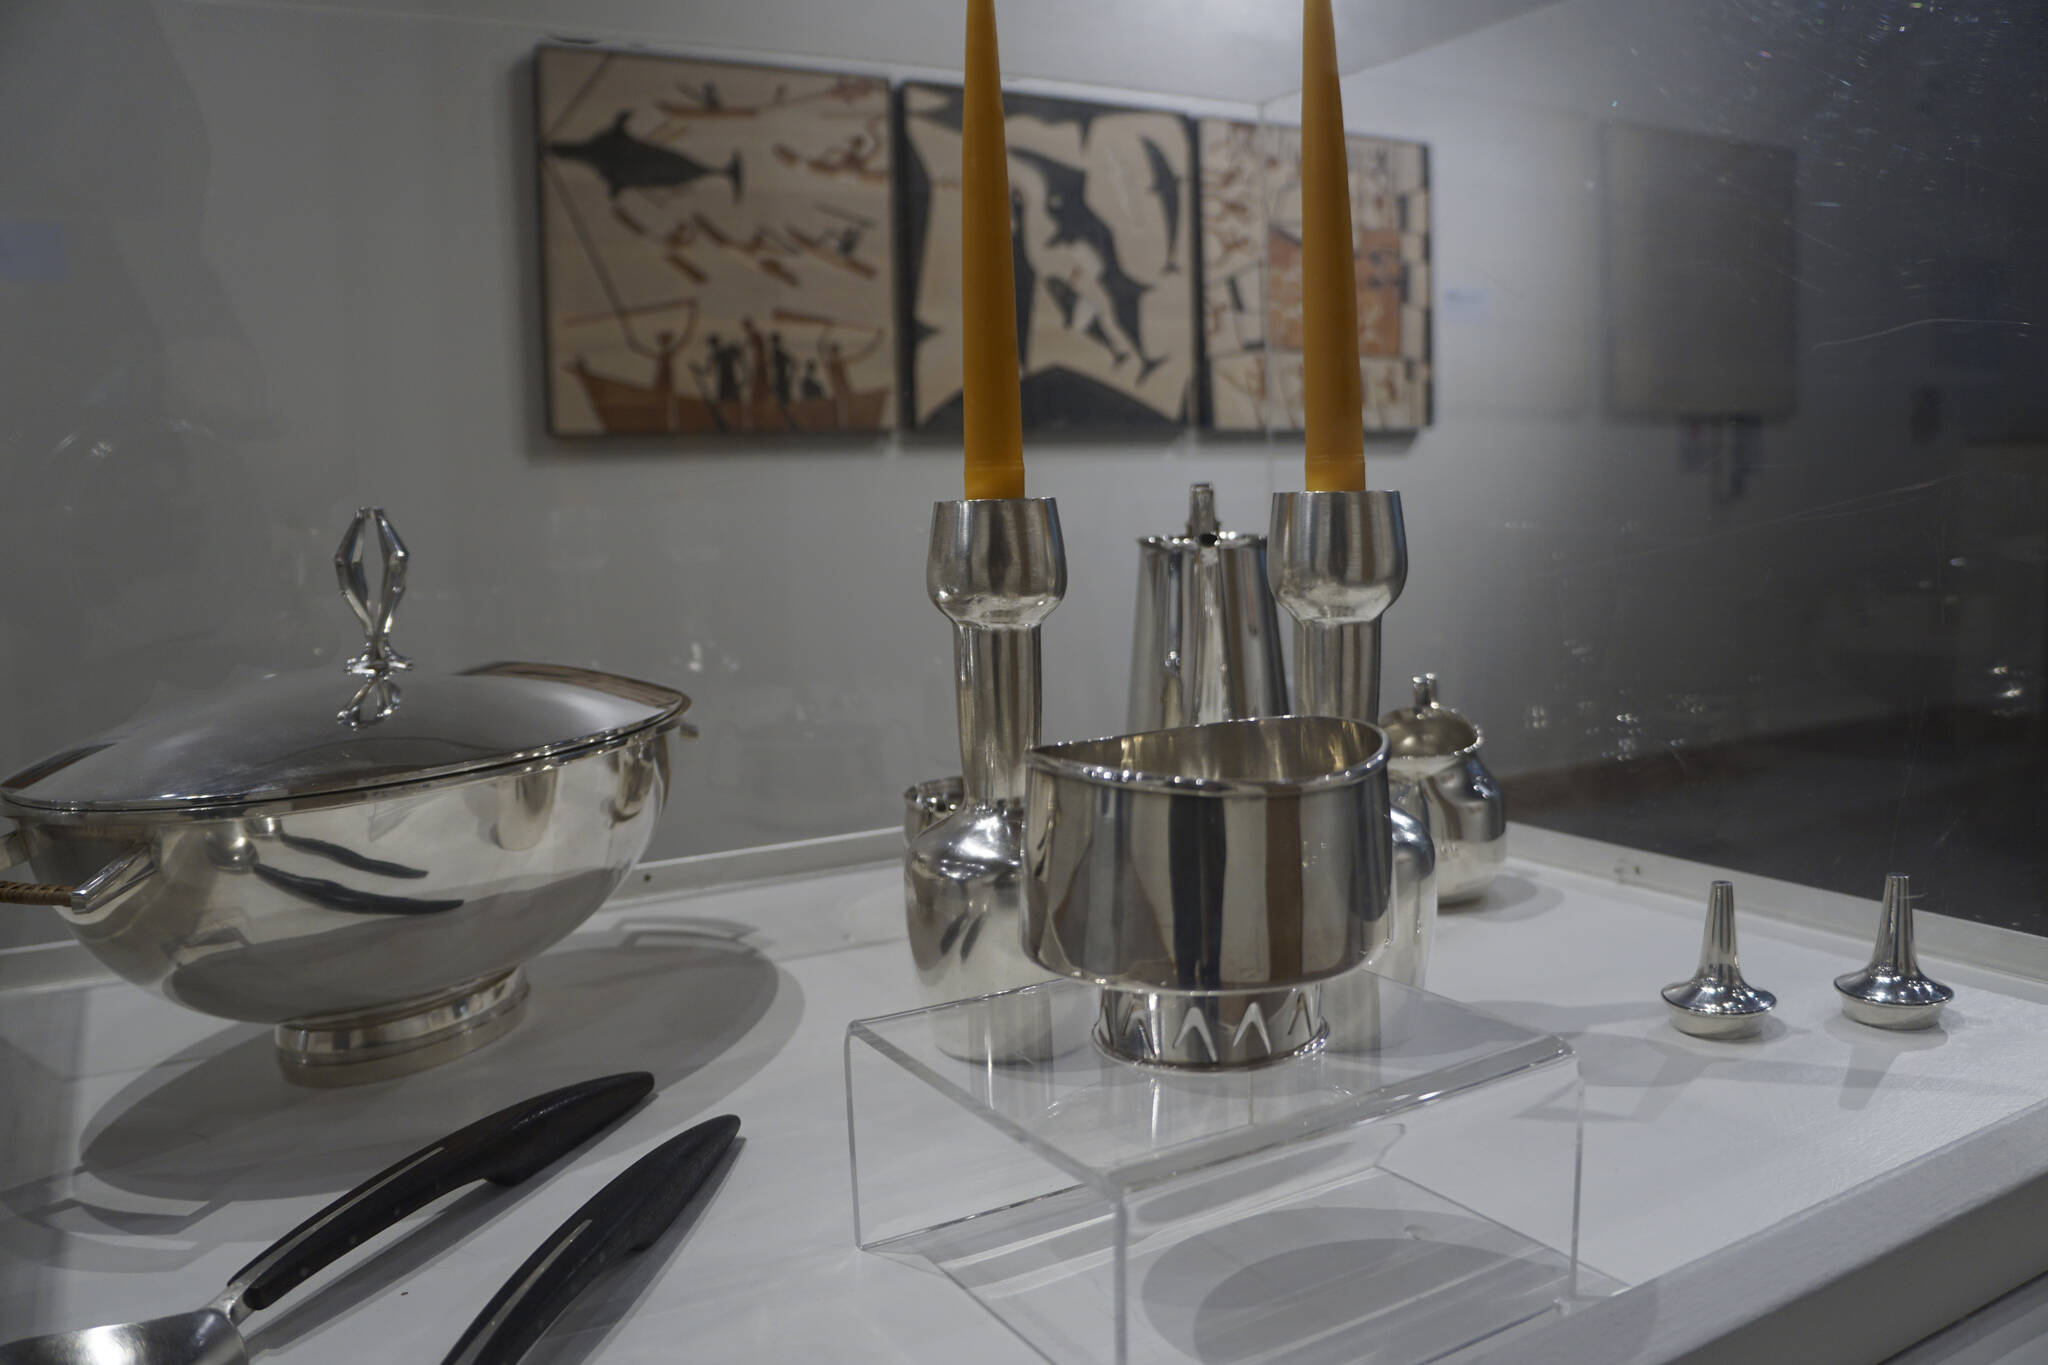 One of the earliest works in “Ron Senungetuk: A Retrospective” is a serving set made by him when he was a student at the School for American Crafts at the Rochester Institute of Technology in the late 1950s. (Photo by Michael Armstrong/Homer News)